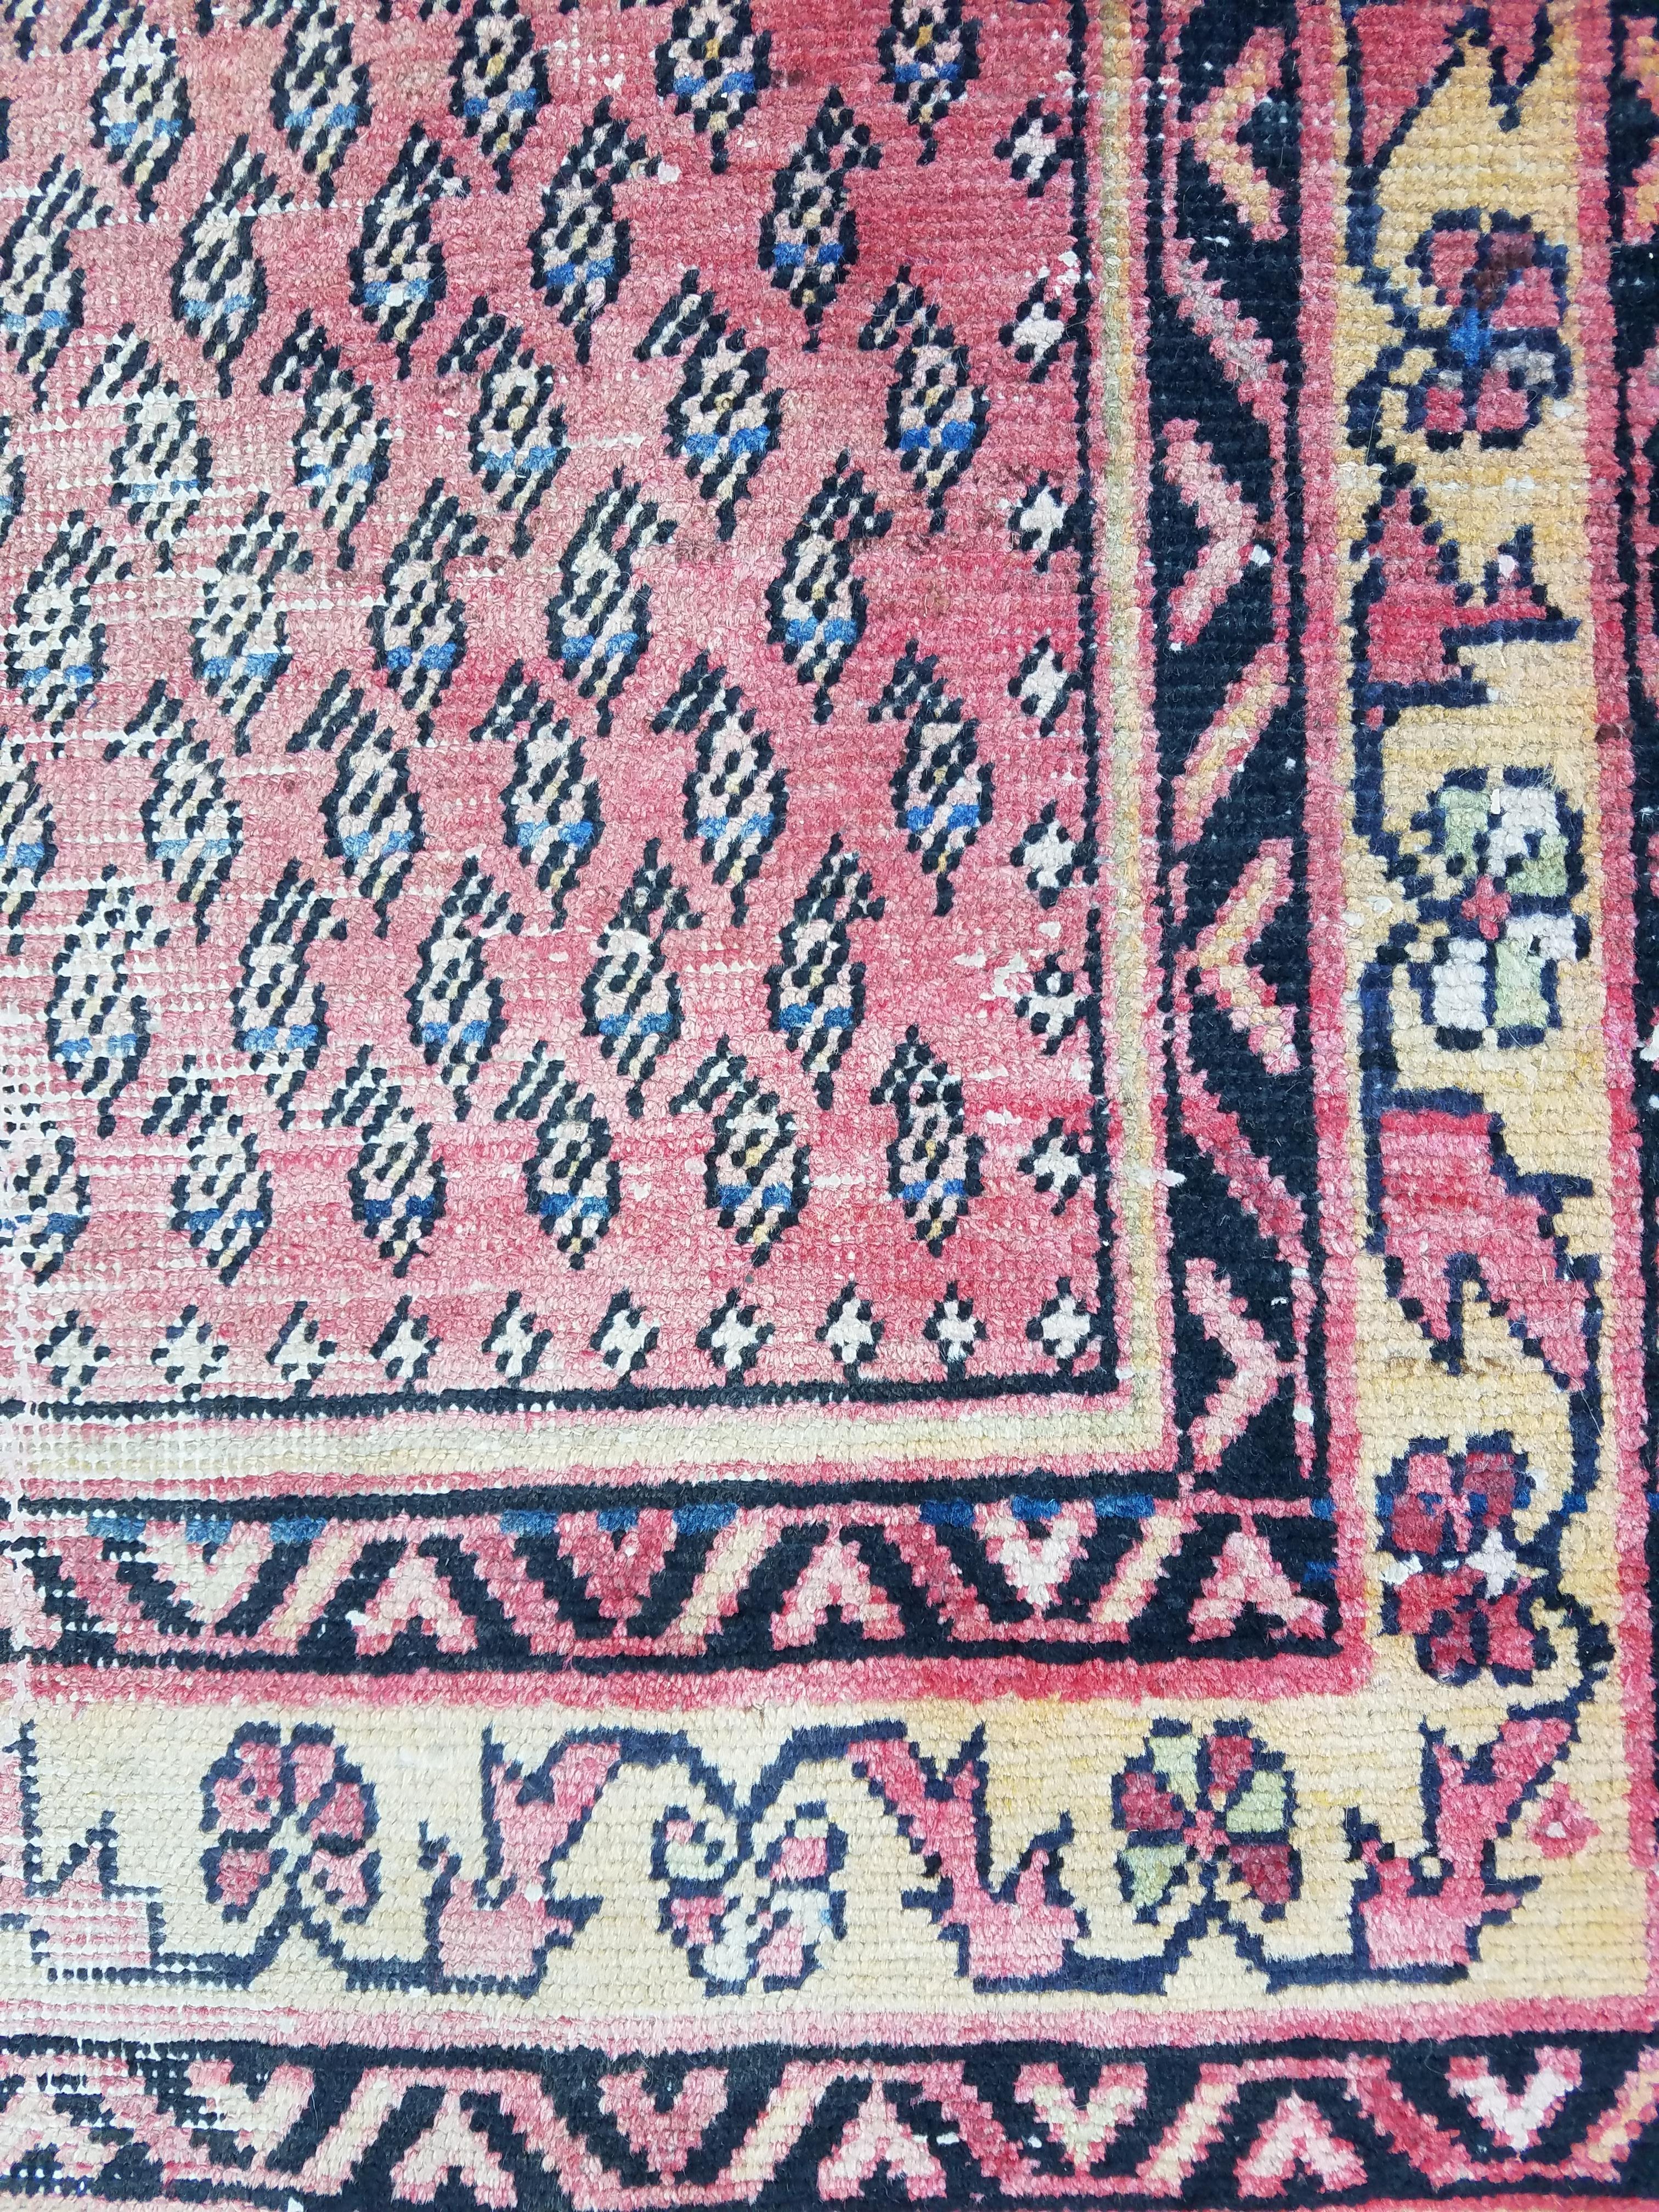 What an amazing oriental rug this one is! This vintage carpet measures approximately 67